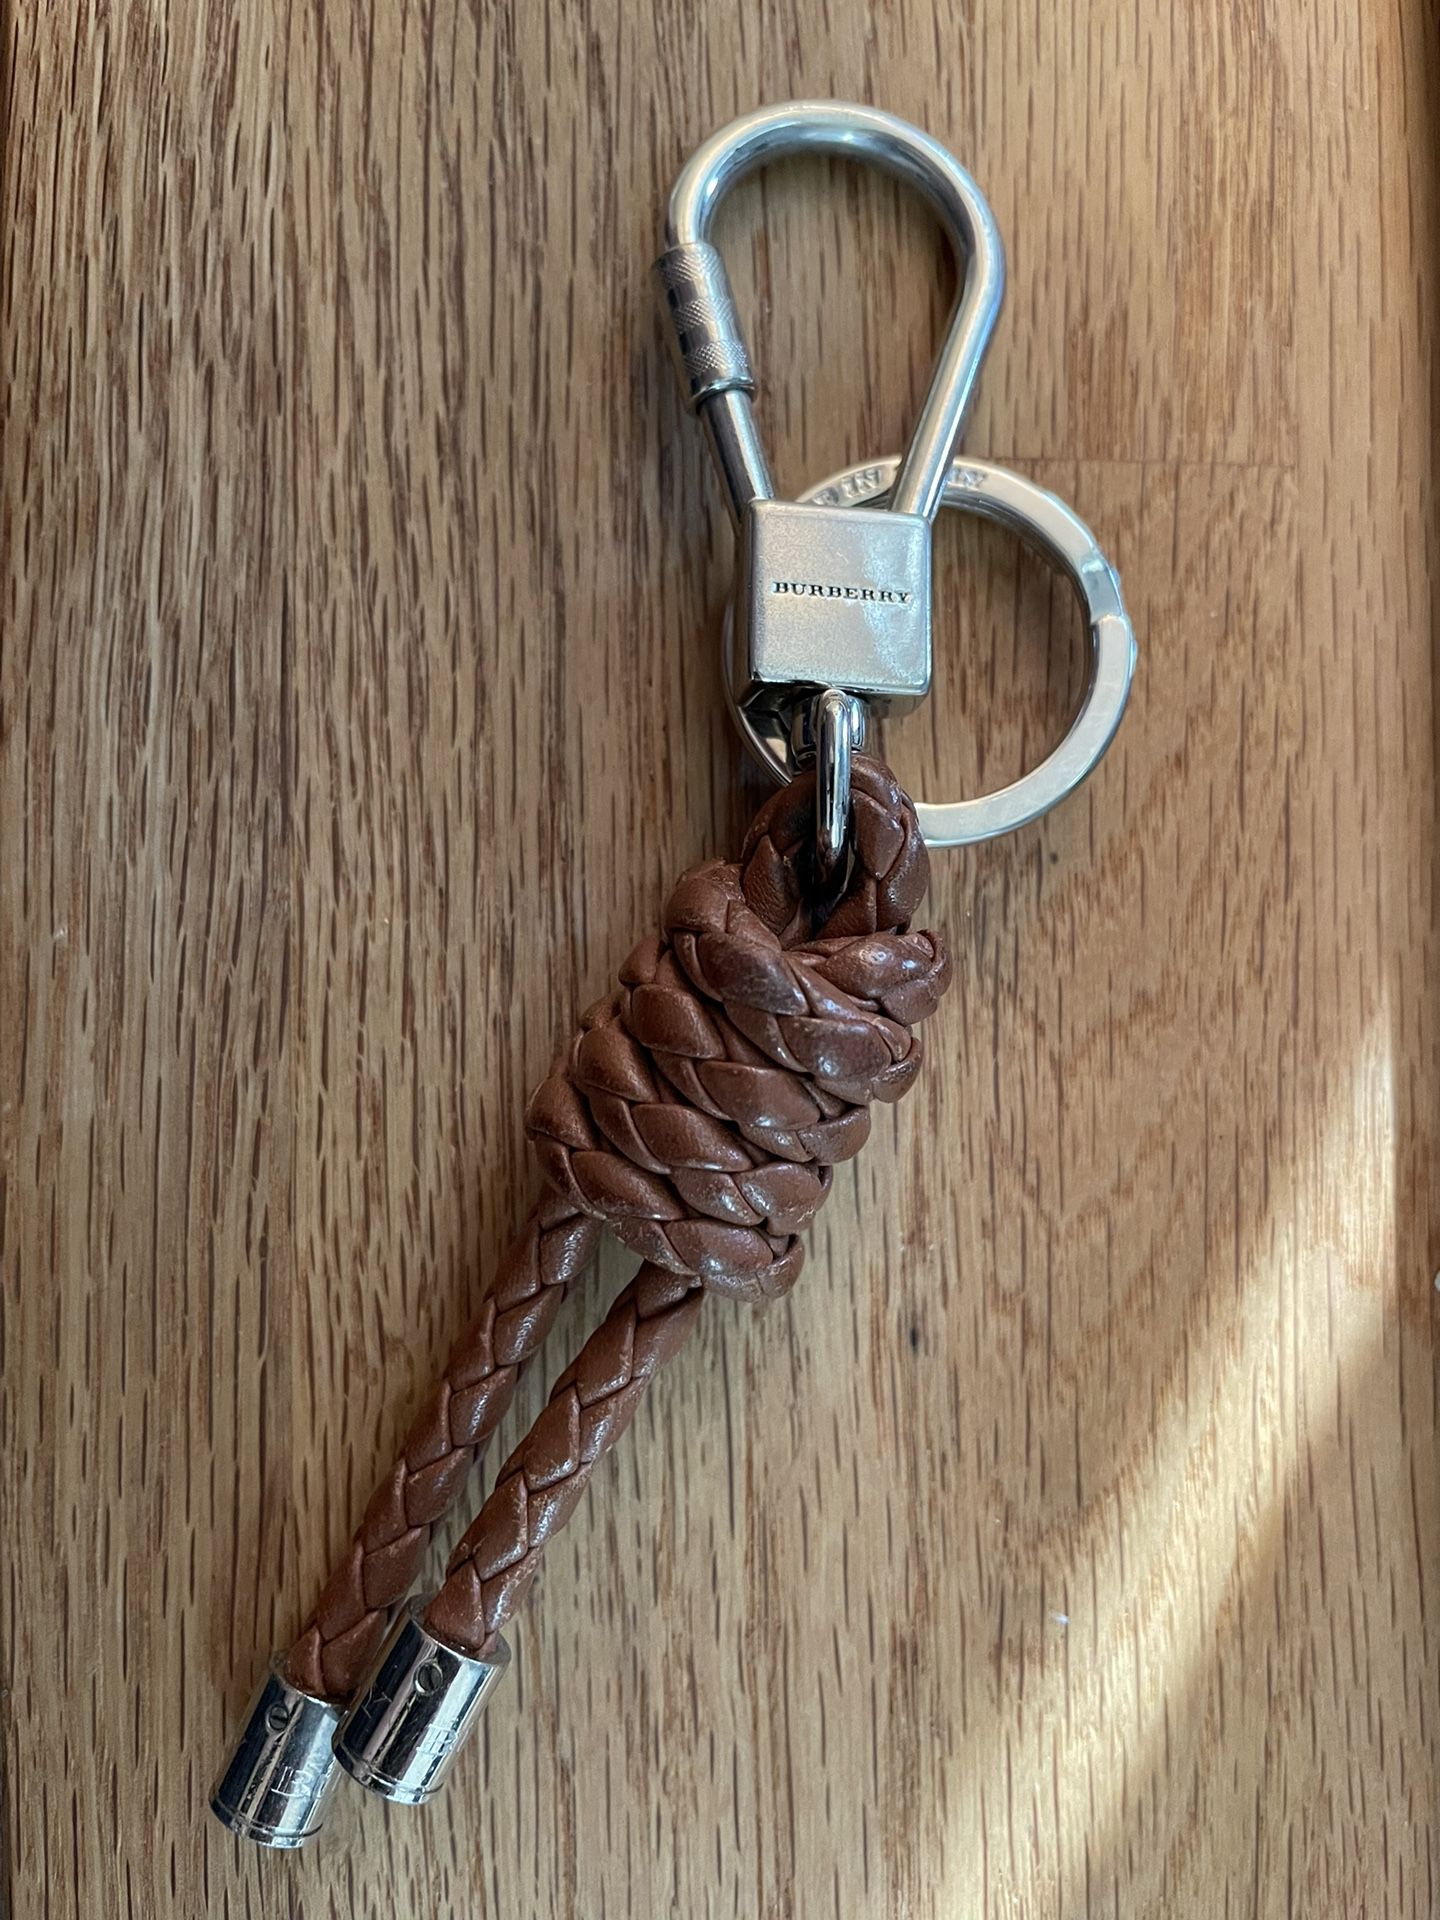 Burberry Leather Key Ring Braided Knot